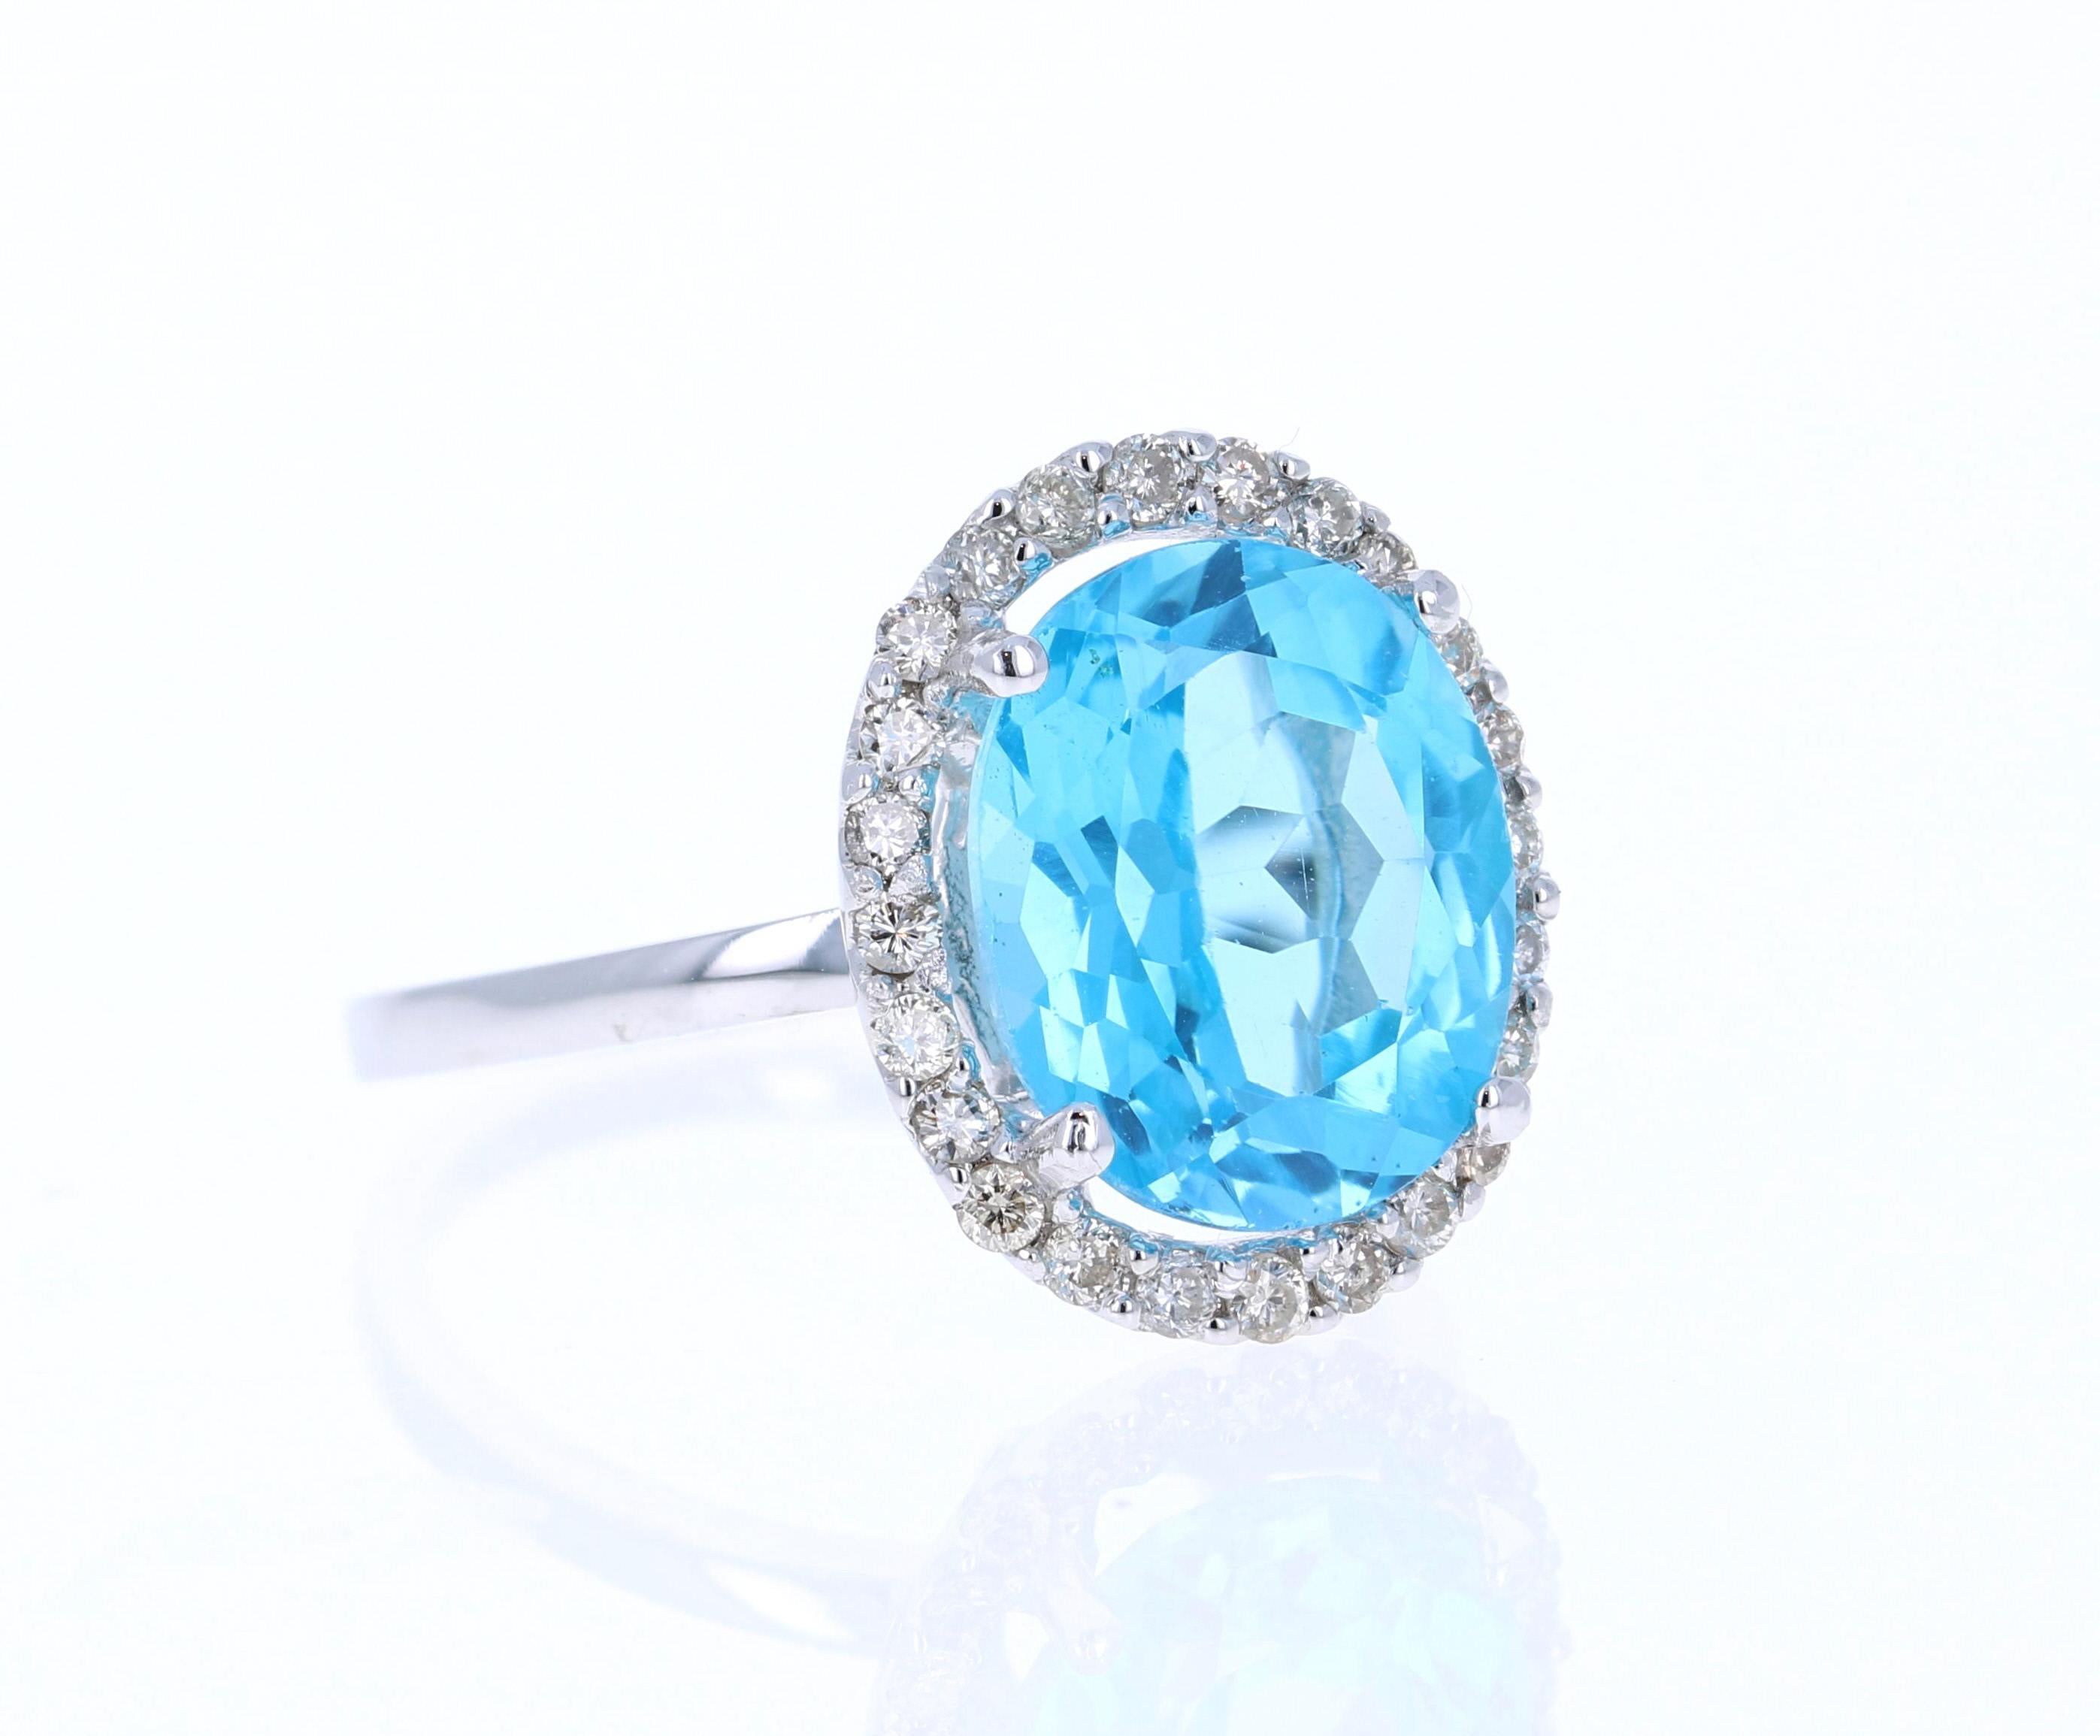 This Oval Cut Blue Topaz Diamond ring has a 5.77 Carat Blue Topaz and is surrounded by 24 Round Cut Diamonds that weigh 0.37 Carats. The total carat weight of the ring is 6.14 Carats. 

The setting is crafted in 14K White Gold and weighs 3.2 grams.
